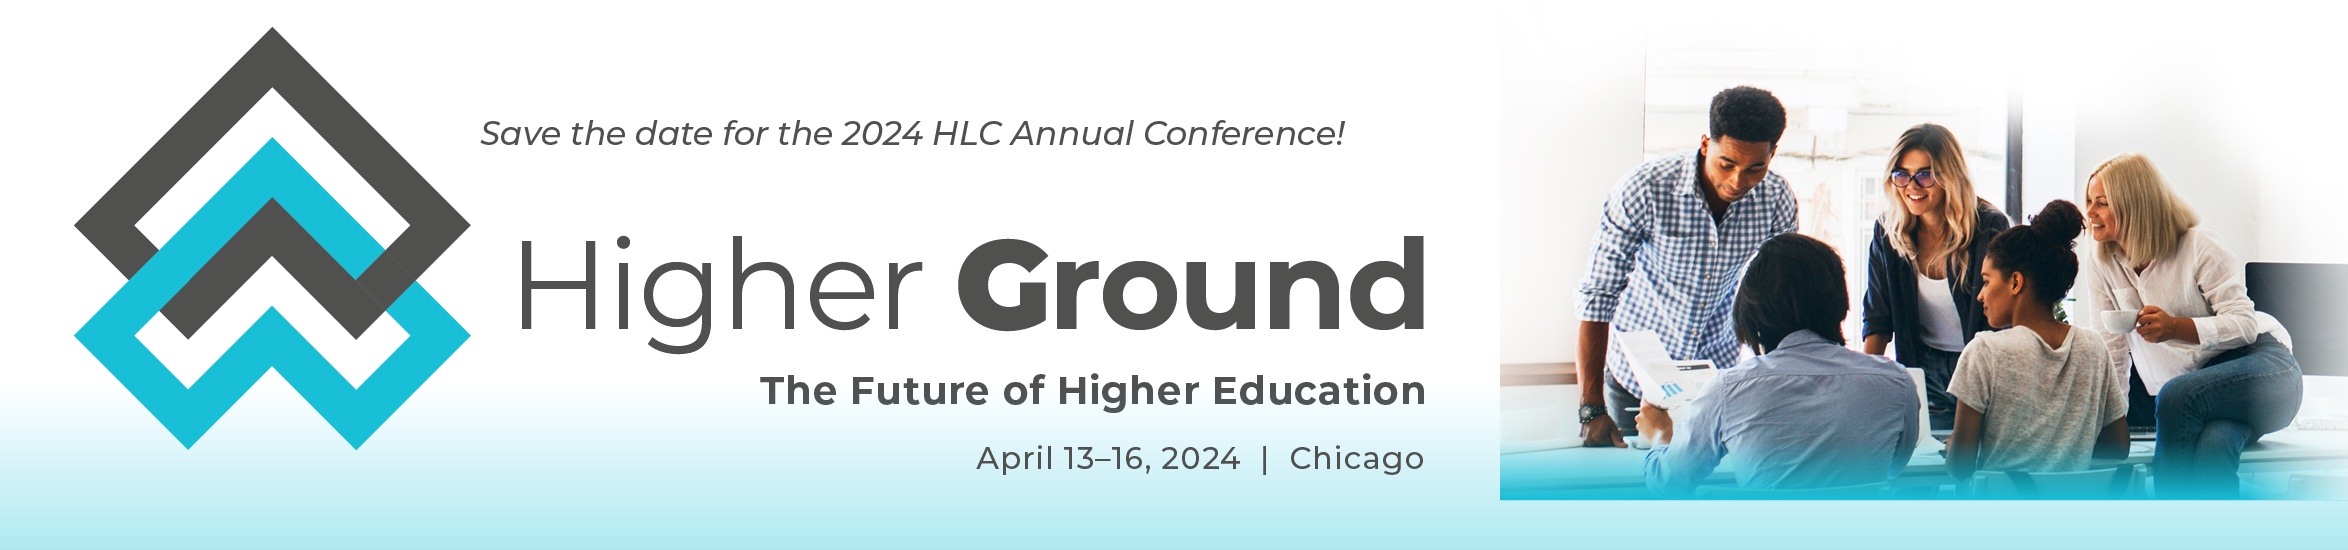 Save the date for the 2024 HLC Annual Conference! Higher Ground, The Future of Higher Education, April 13-16 | Chicago